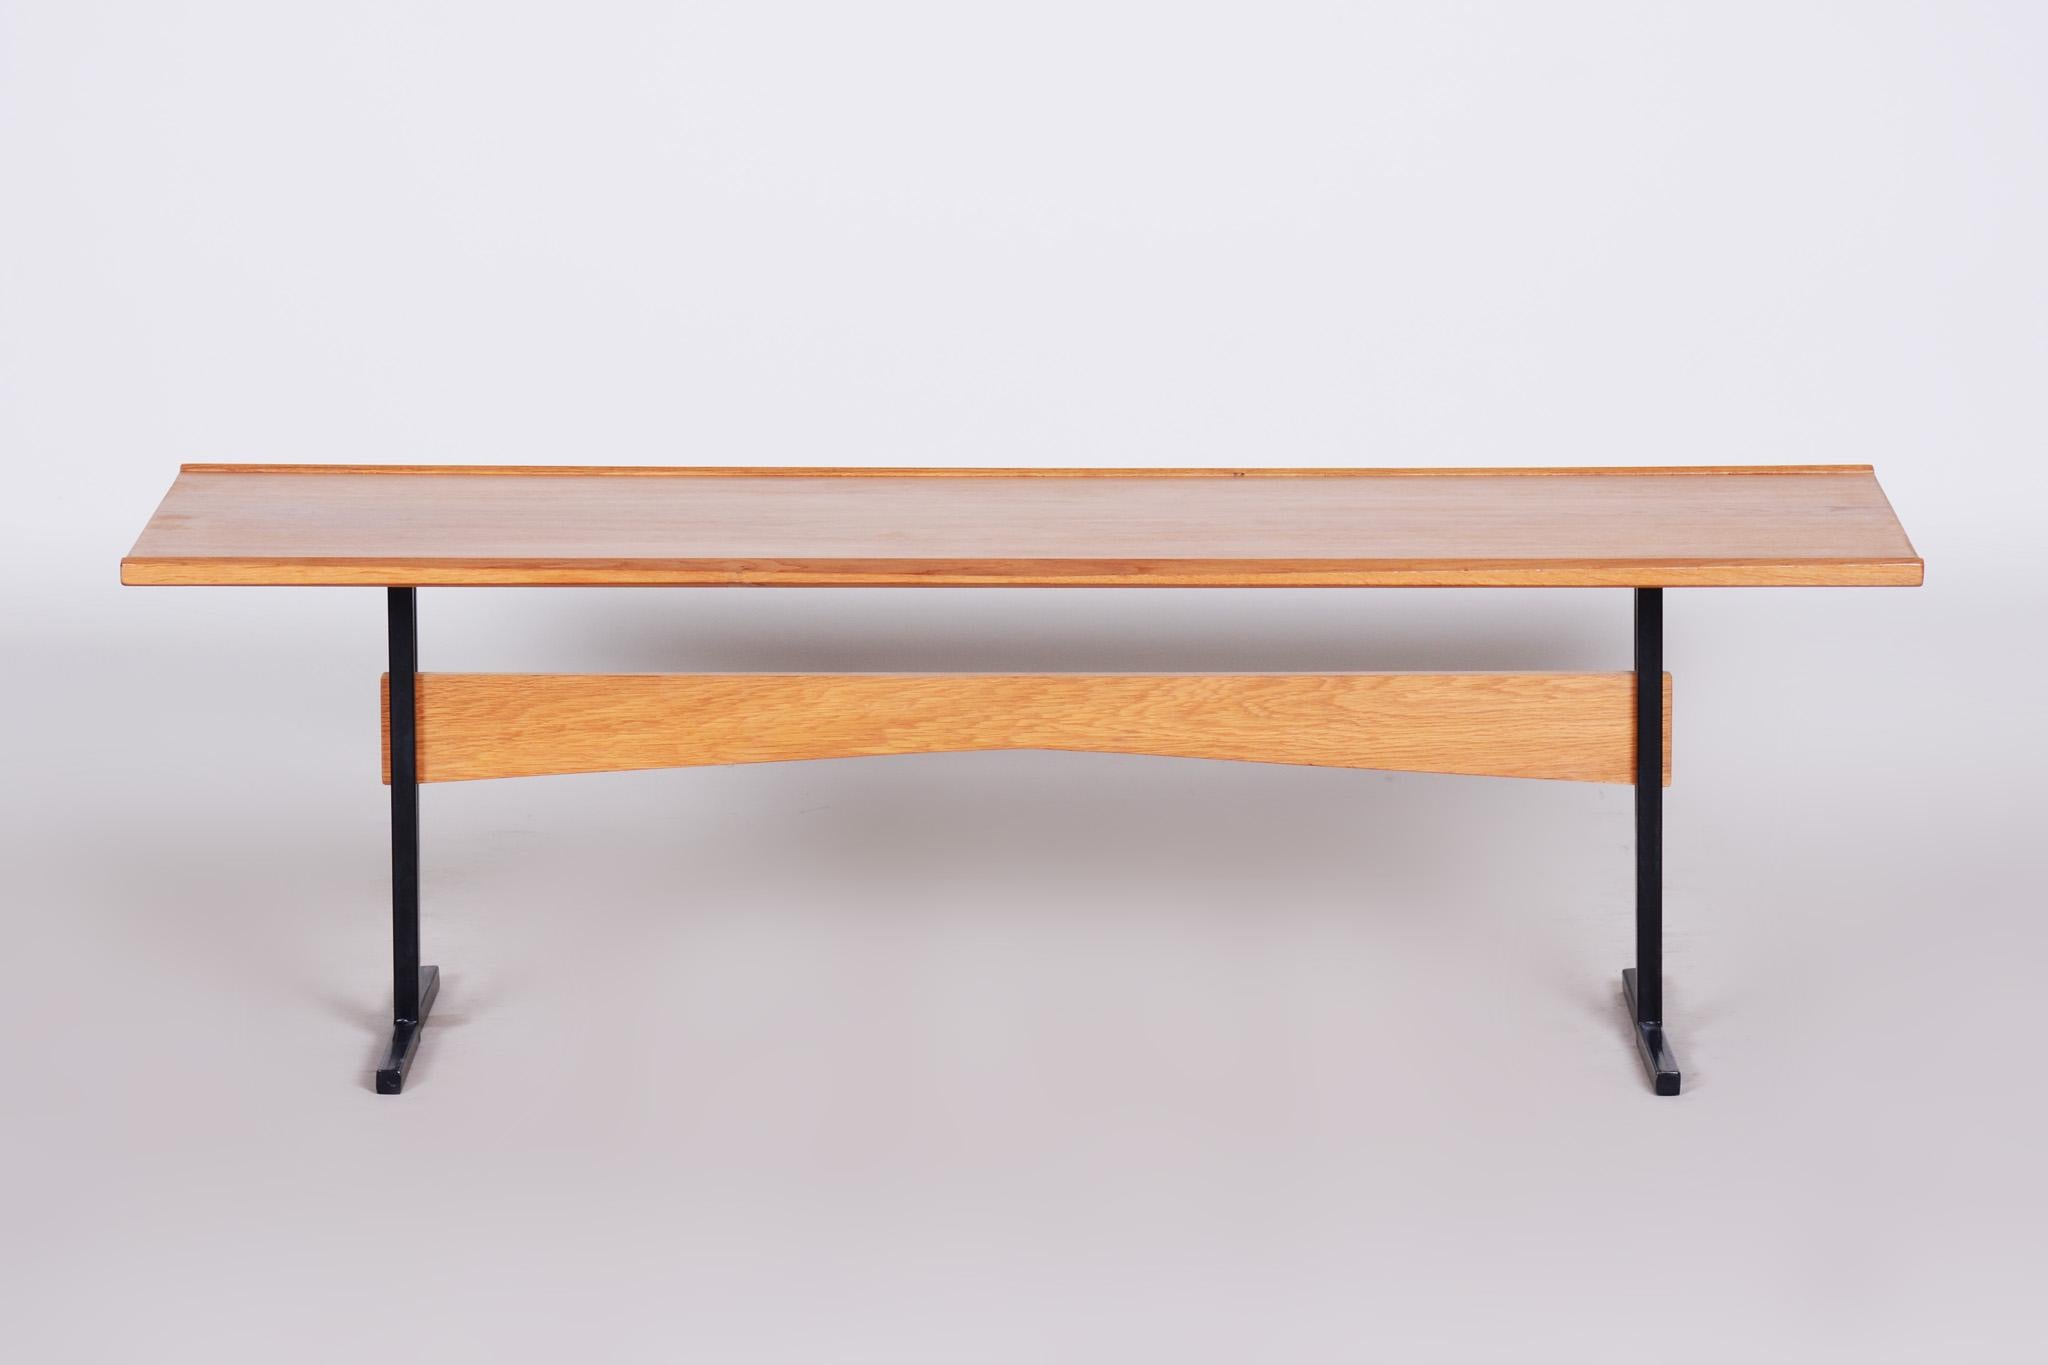 Oak table
Czech Mid-Century Modern
Material: Ash and lacquered steel
Period: 1960-1969.